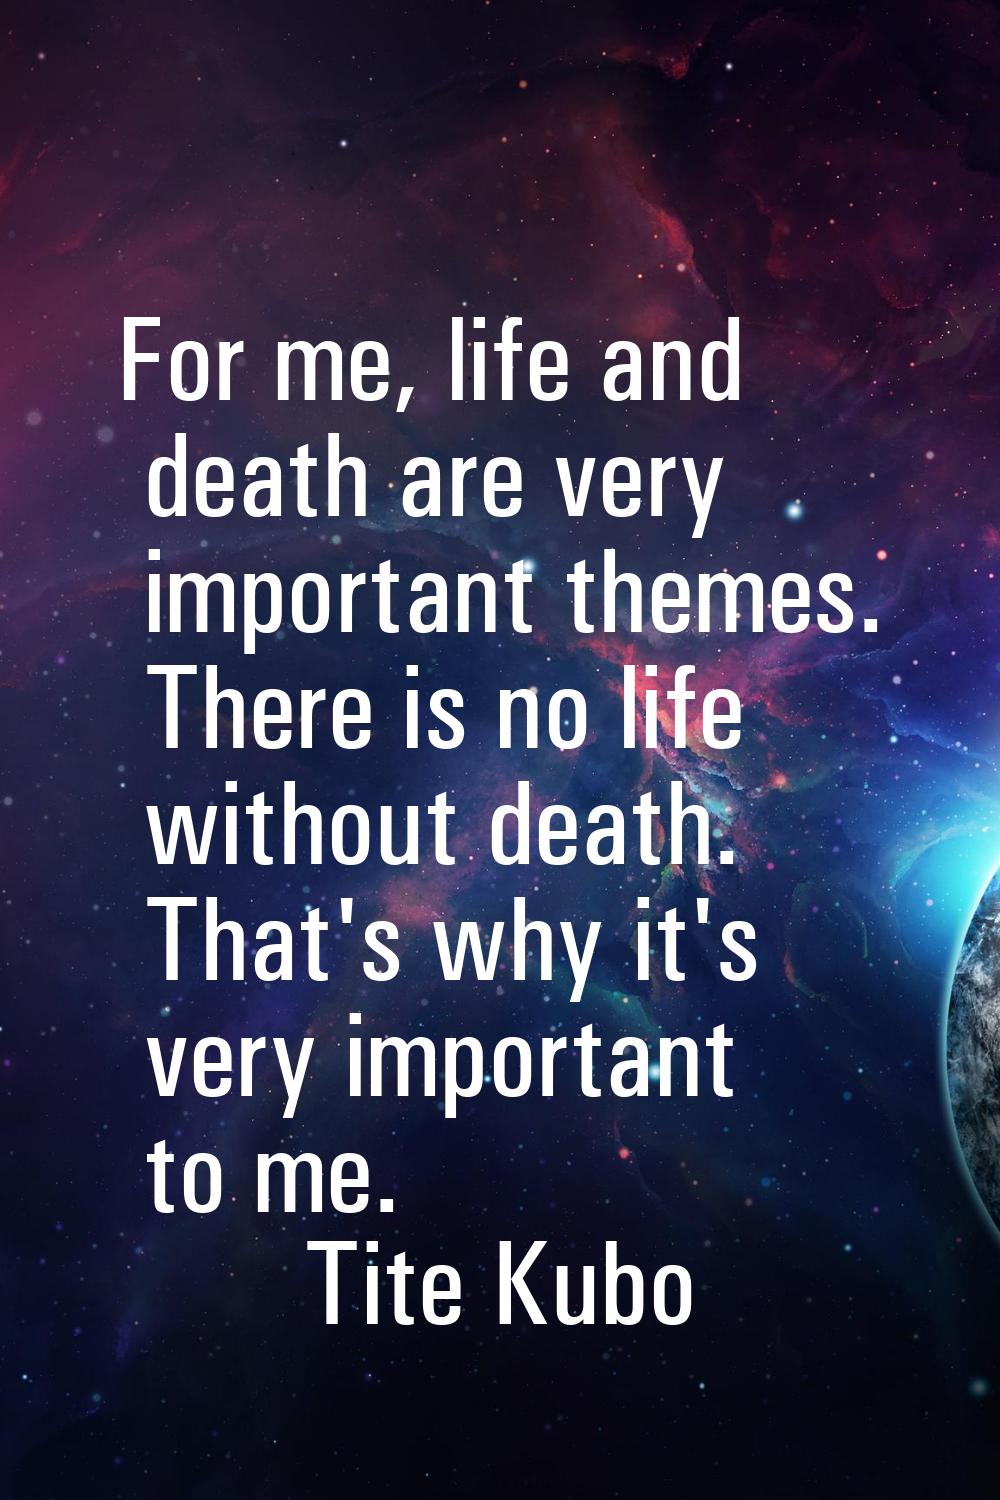 For me, life and death are very important themes. There is no life without death. That's why it's v